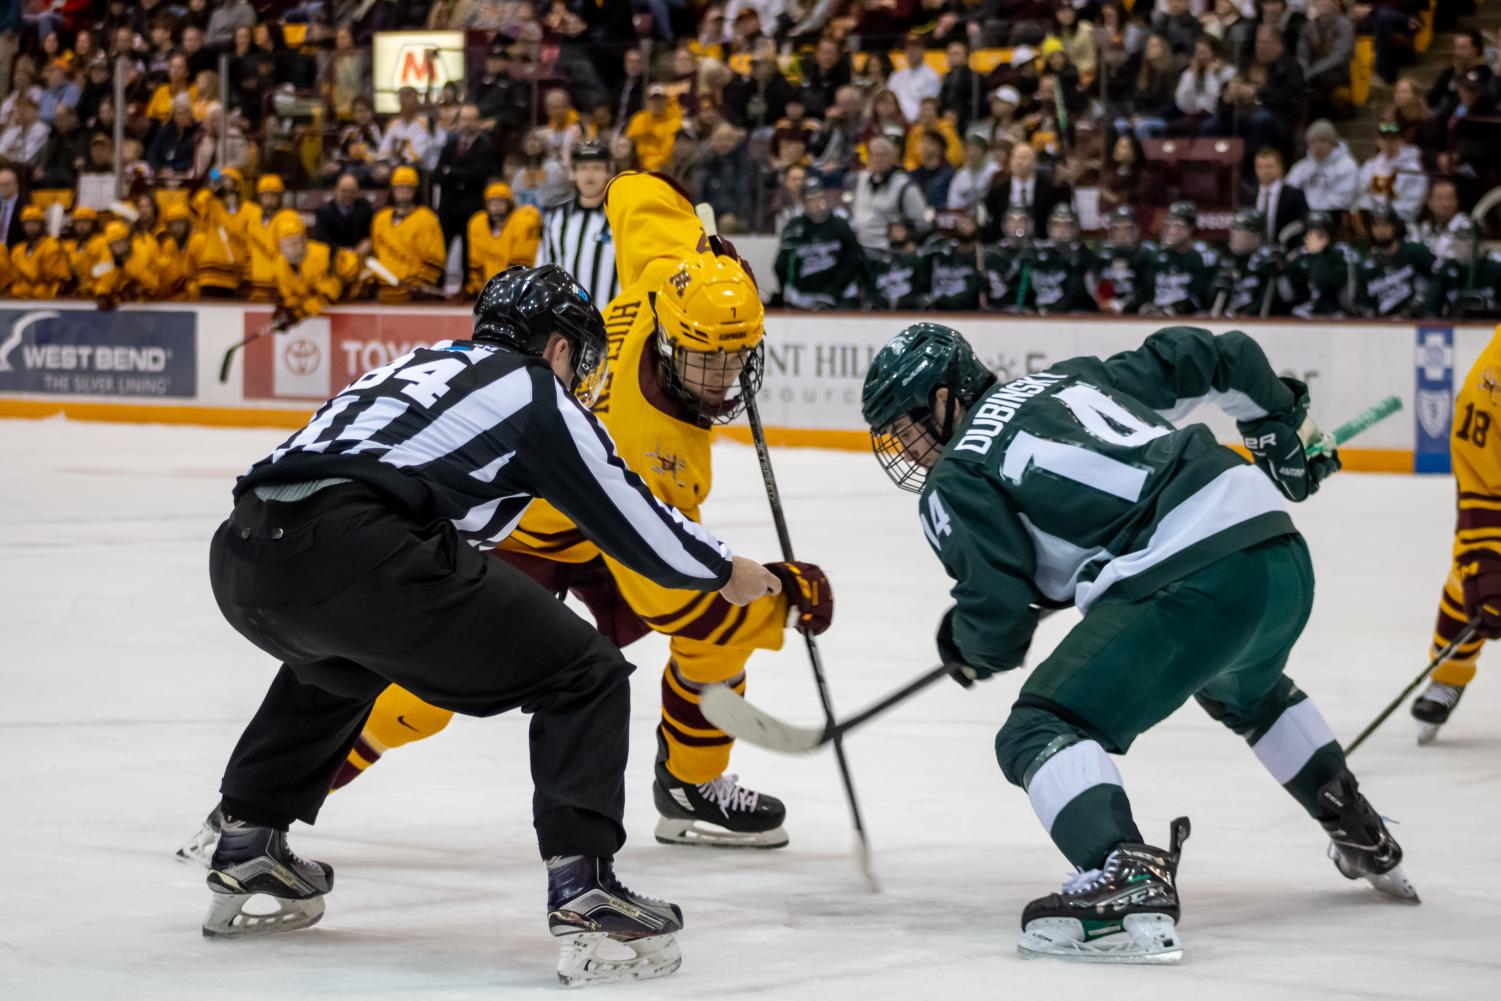 Logan Cooley's two goals lead Gophers to rout over Badgers